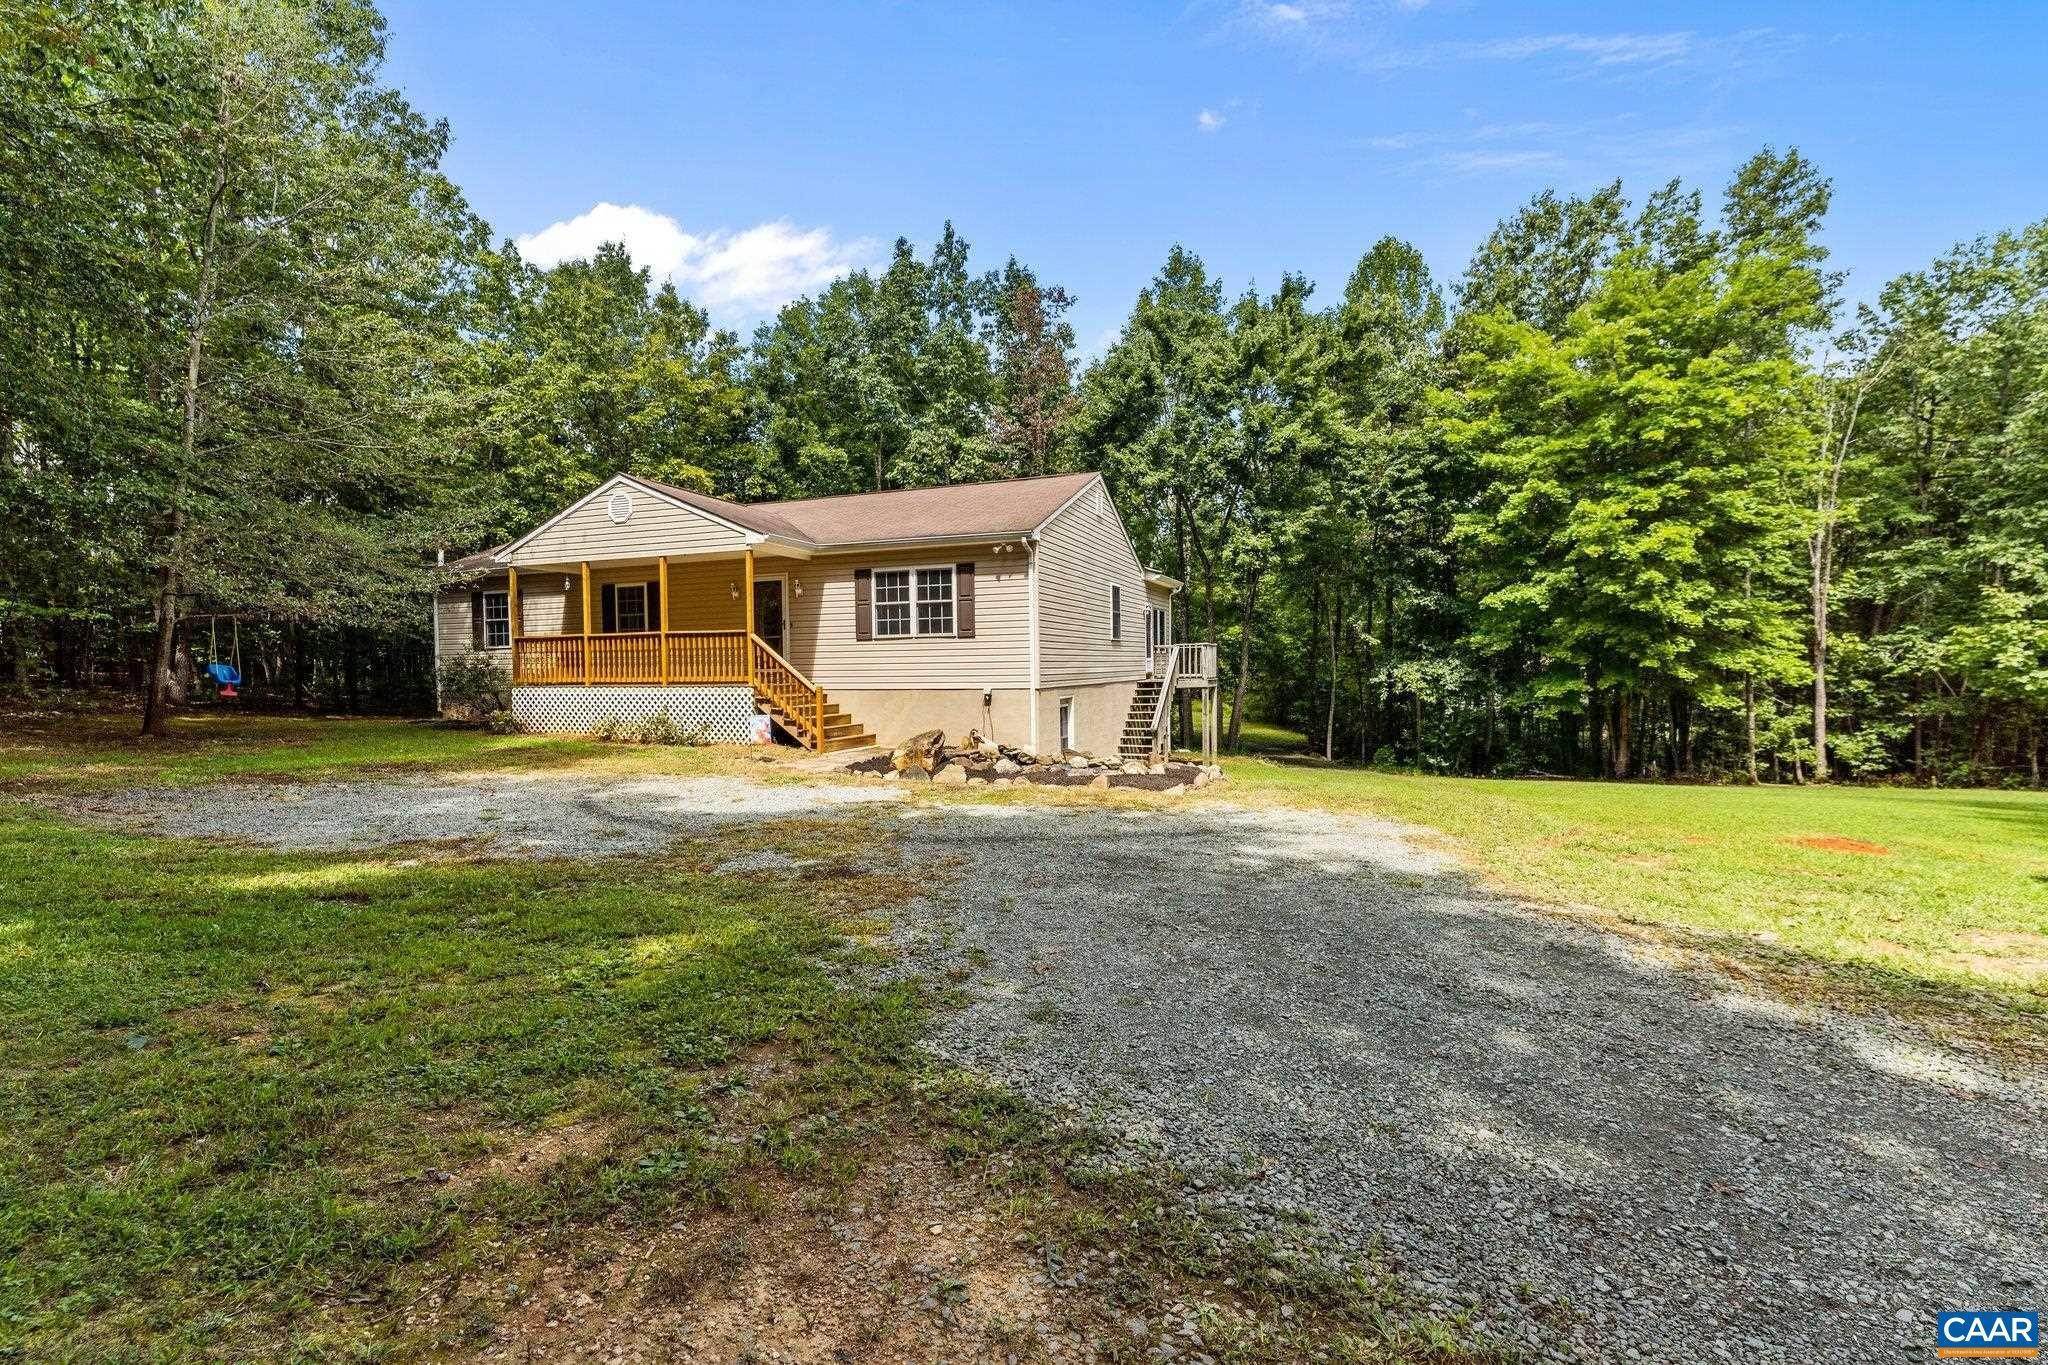 2. Single Family Homes for Sale at 245 BRANCH Road Scottsville, Virginia 24590 United States